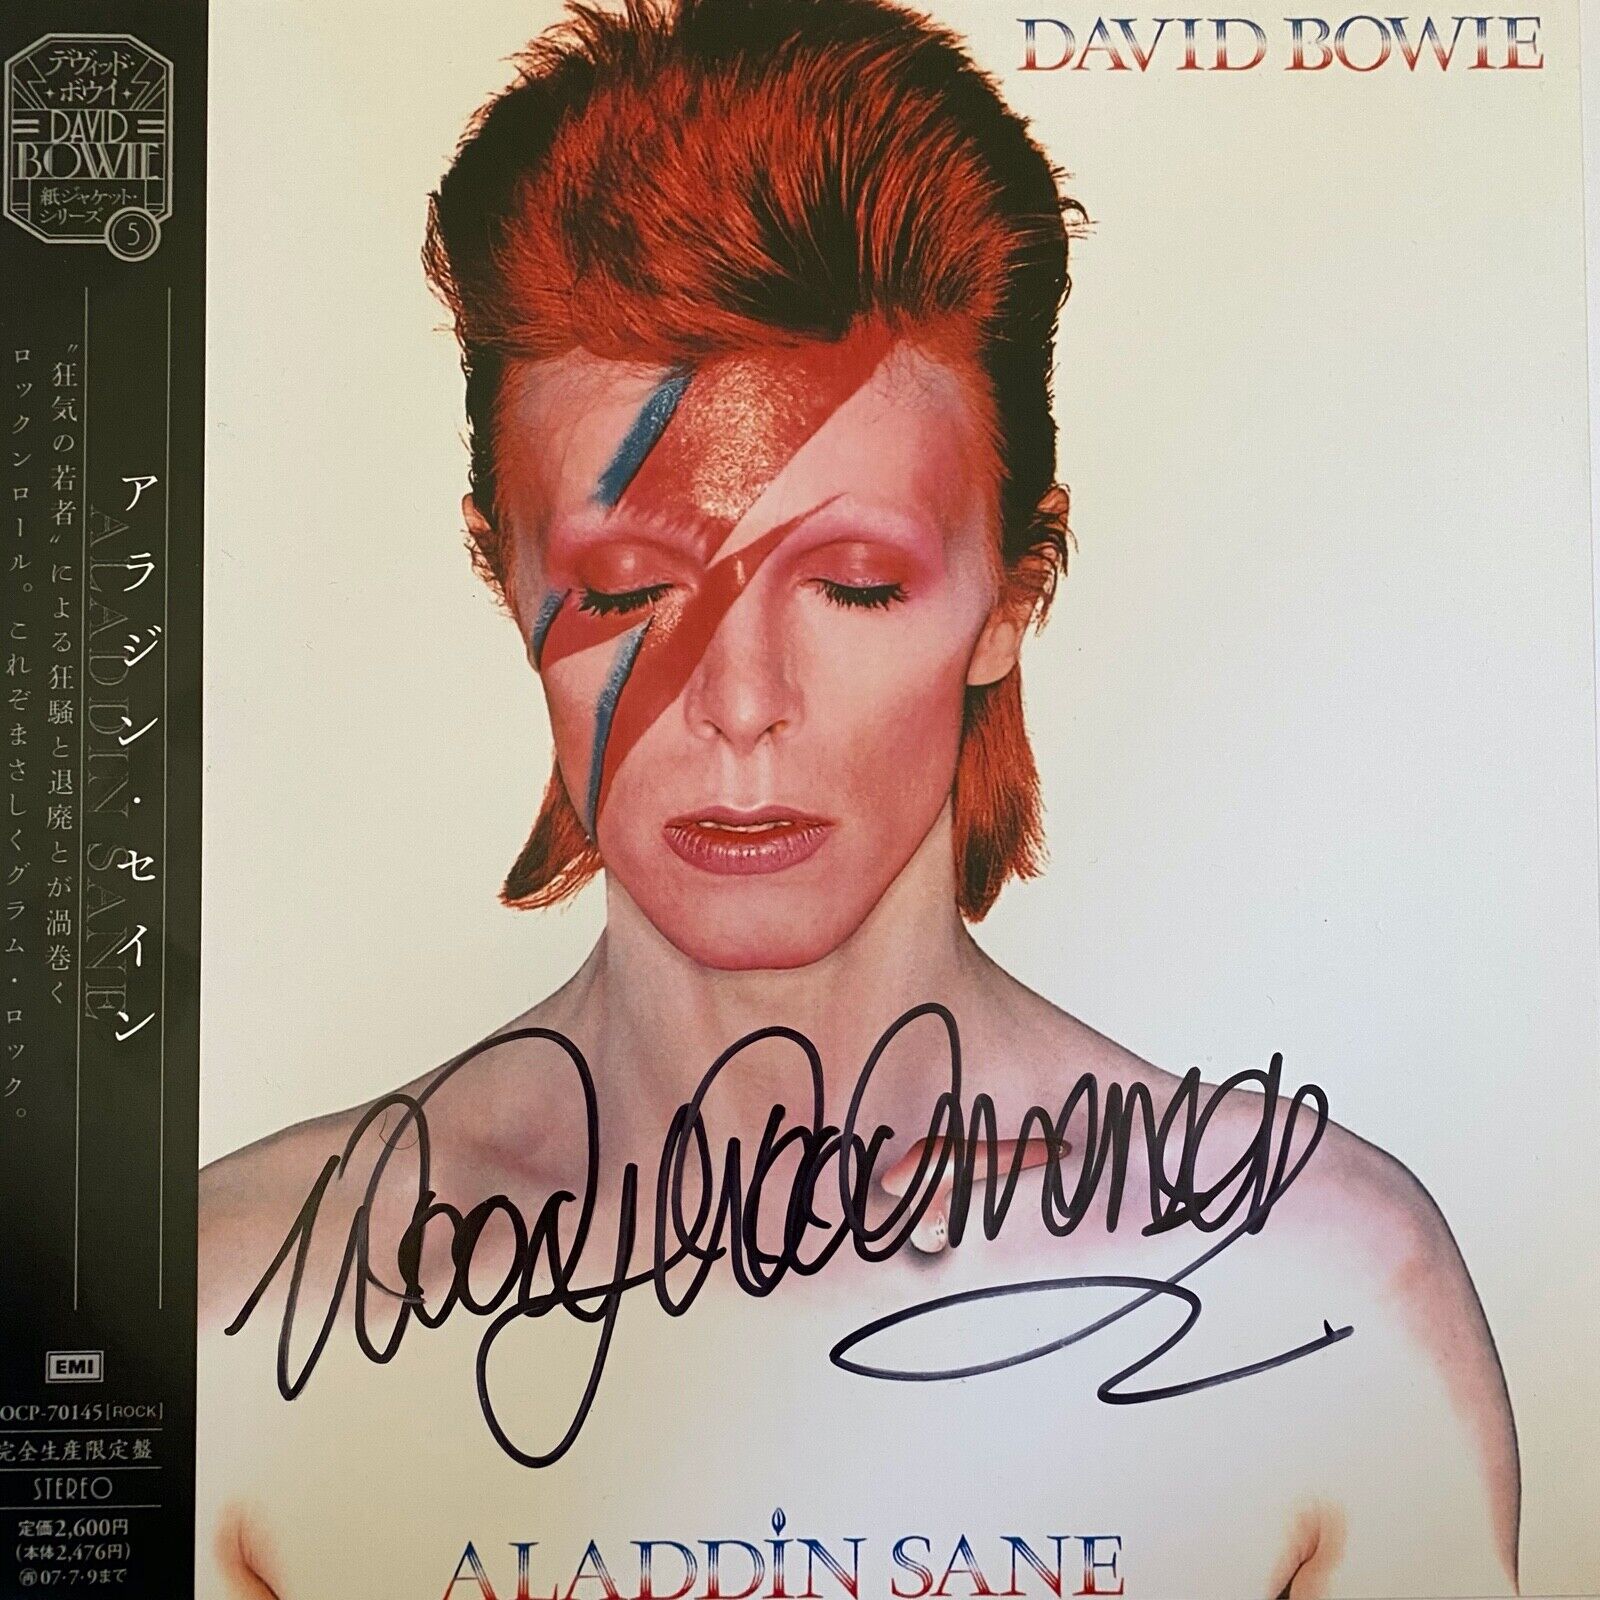 Woody Woodmansey Signed 12x12 Photo Poster painting - David Bowie Aladdin Sane 1